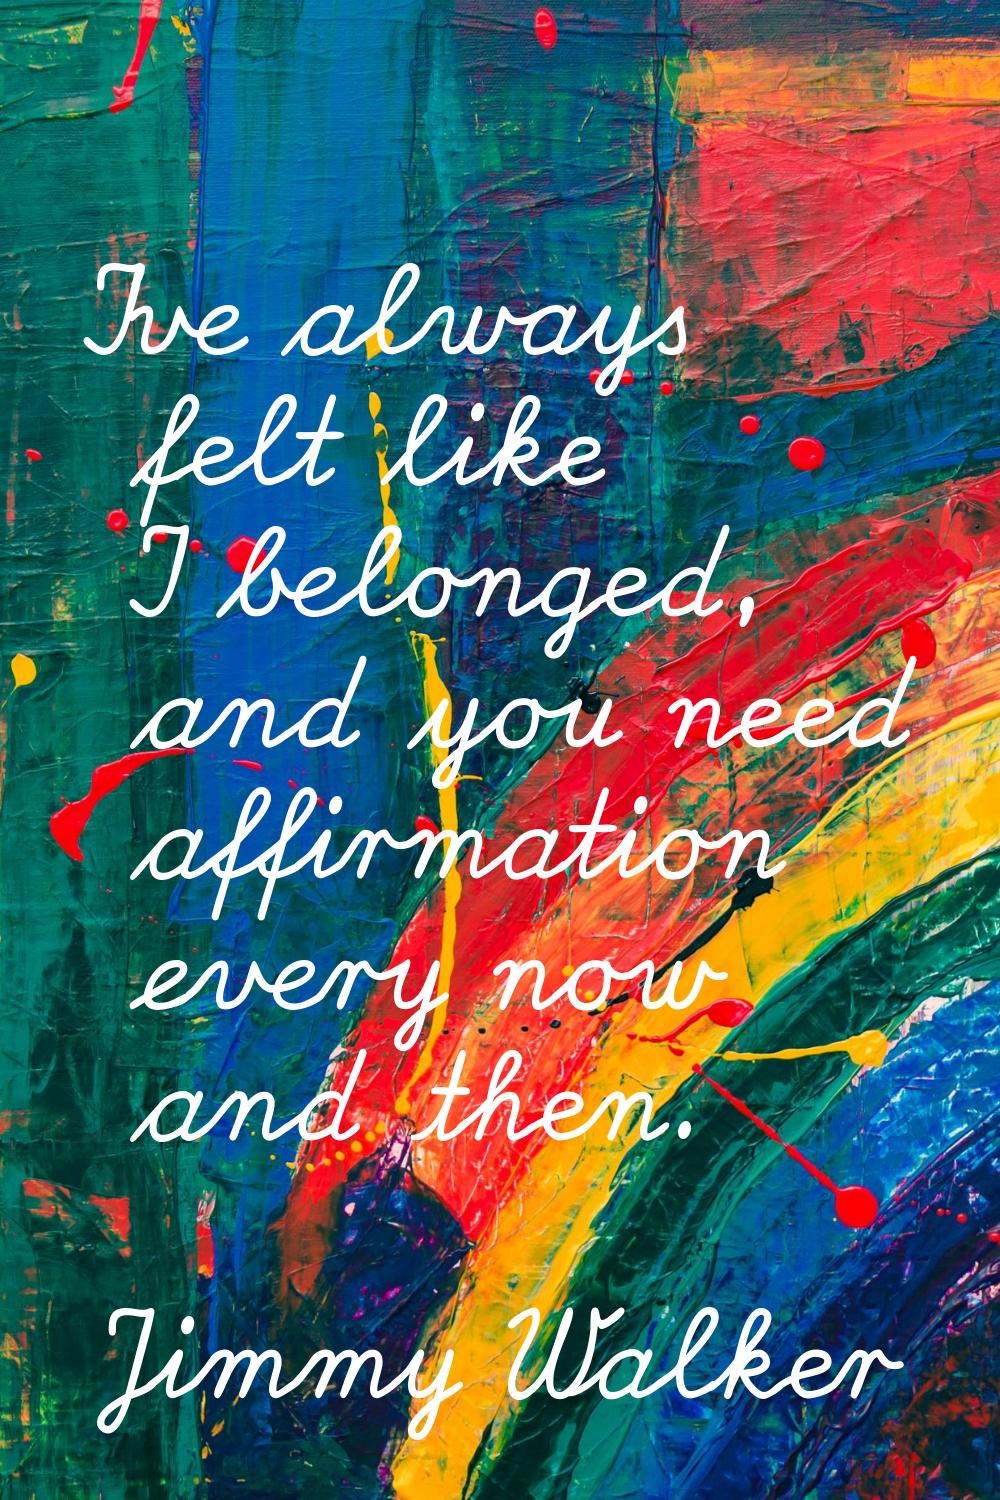 I've always felt like I belonged, and you need affirmation every now and then.